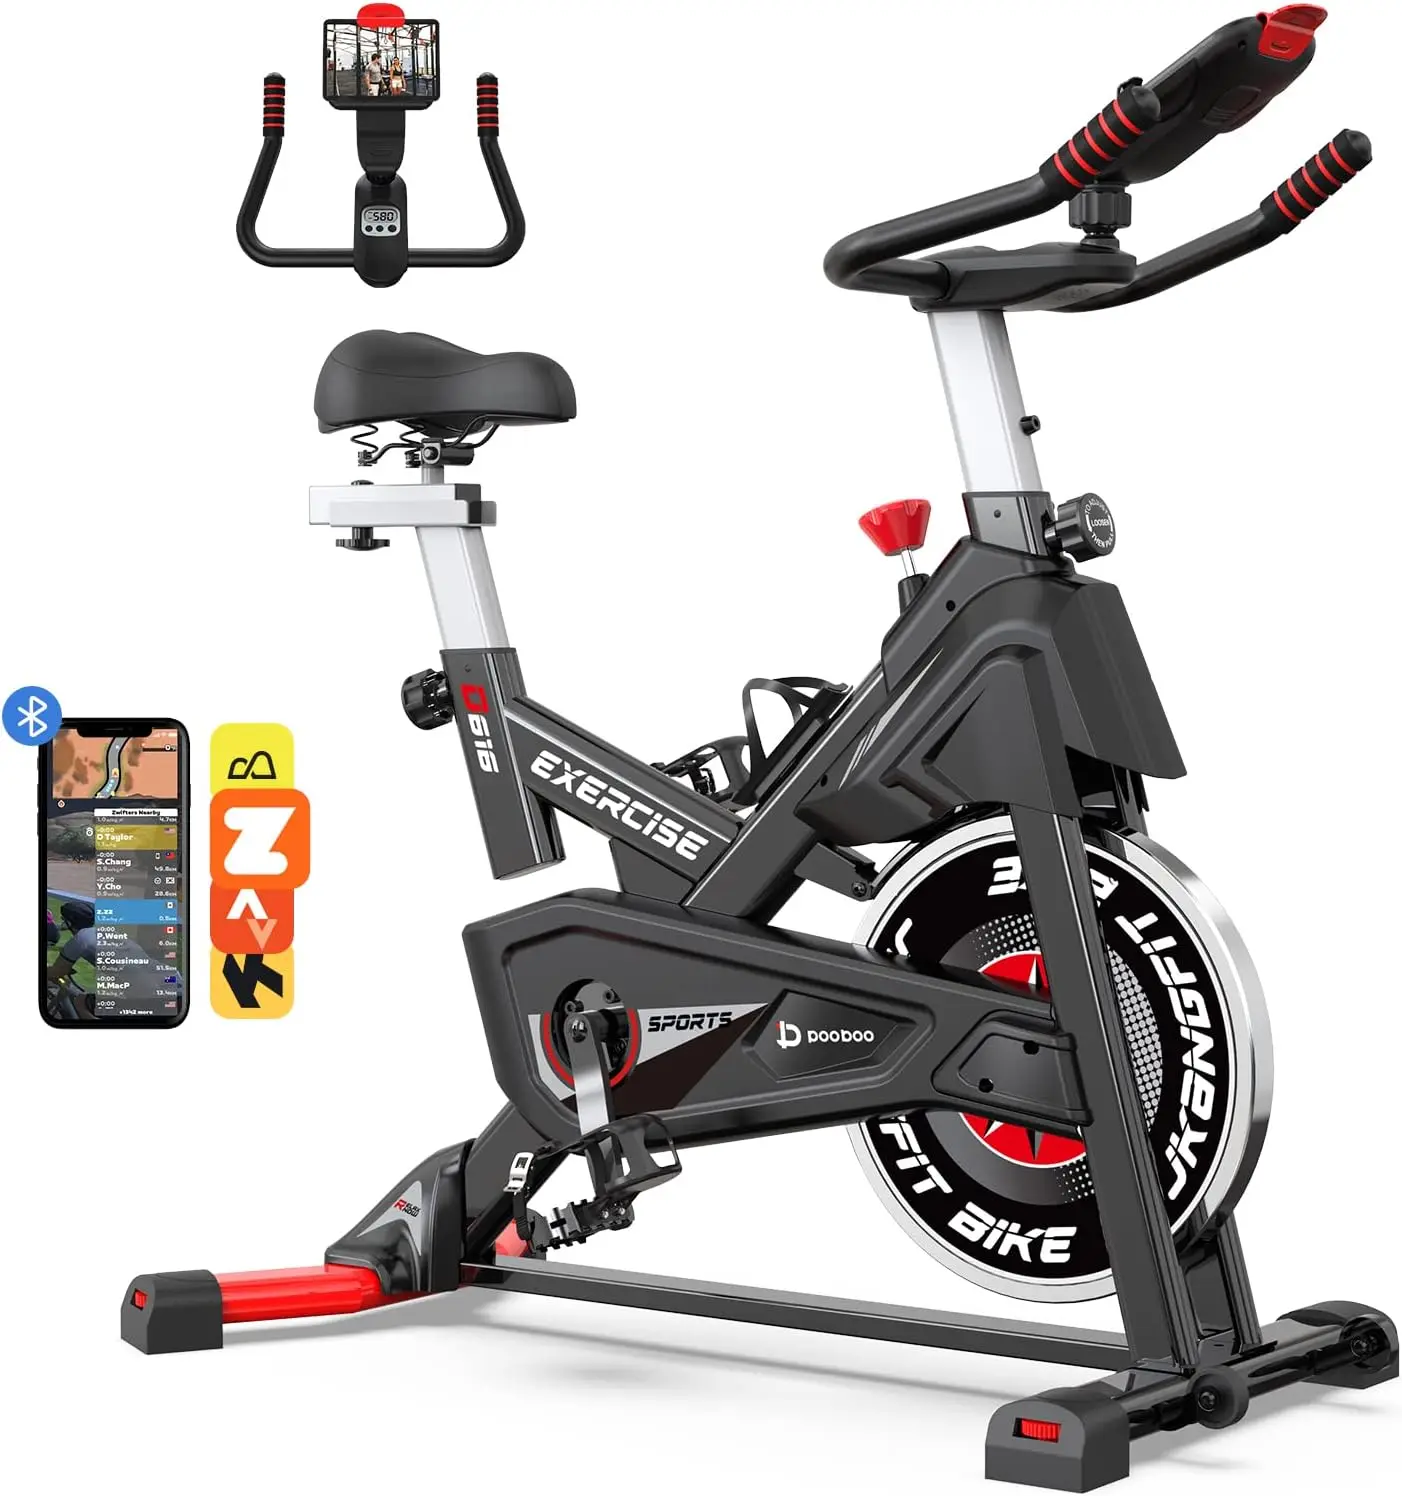 

Bike, Stationary Bike for Indoor Cycling (Upgraded Version), Cycle Bike w/ 360° Rotate Ipad Holder for Home Gym, Silent Belt D